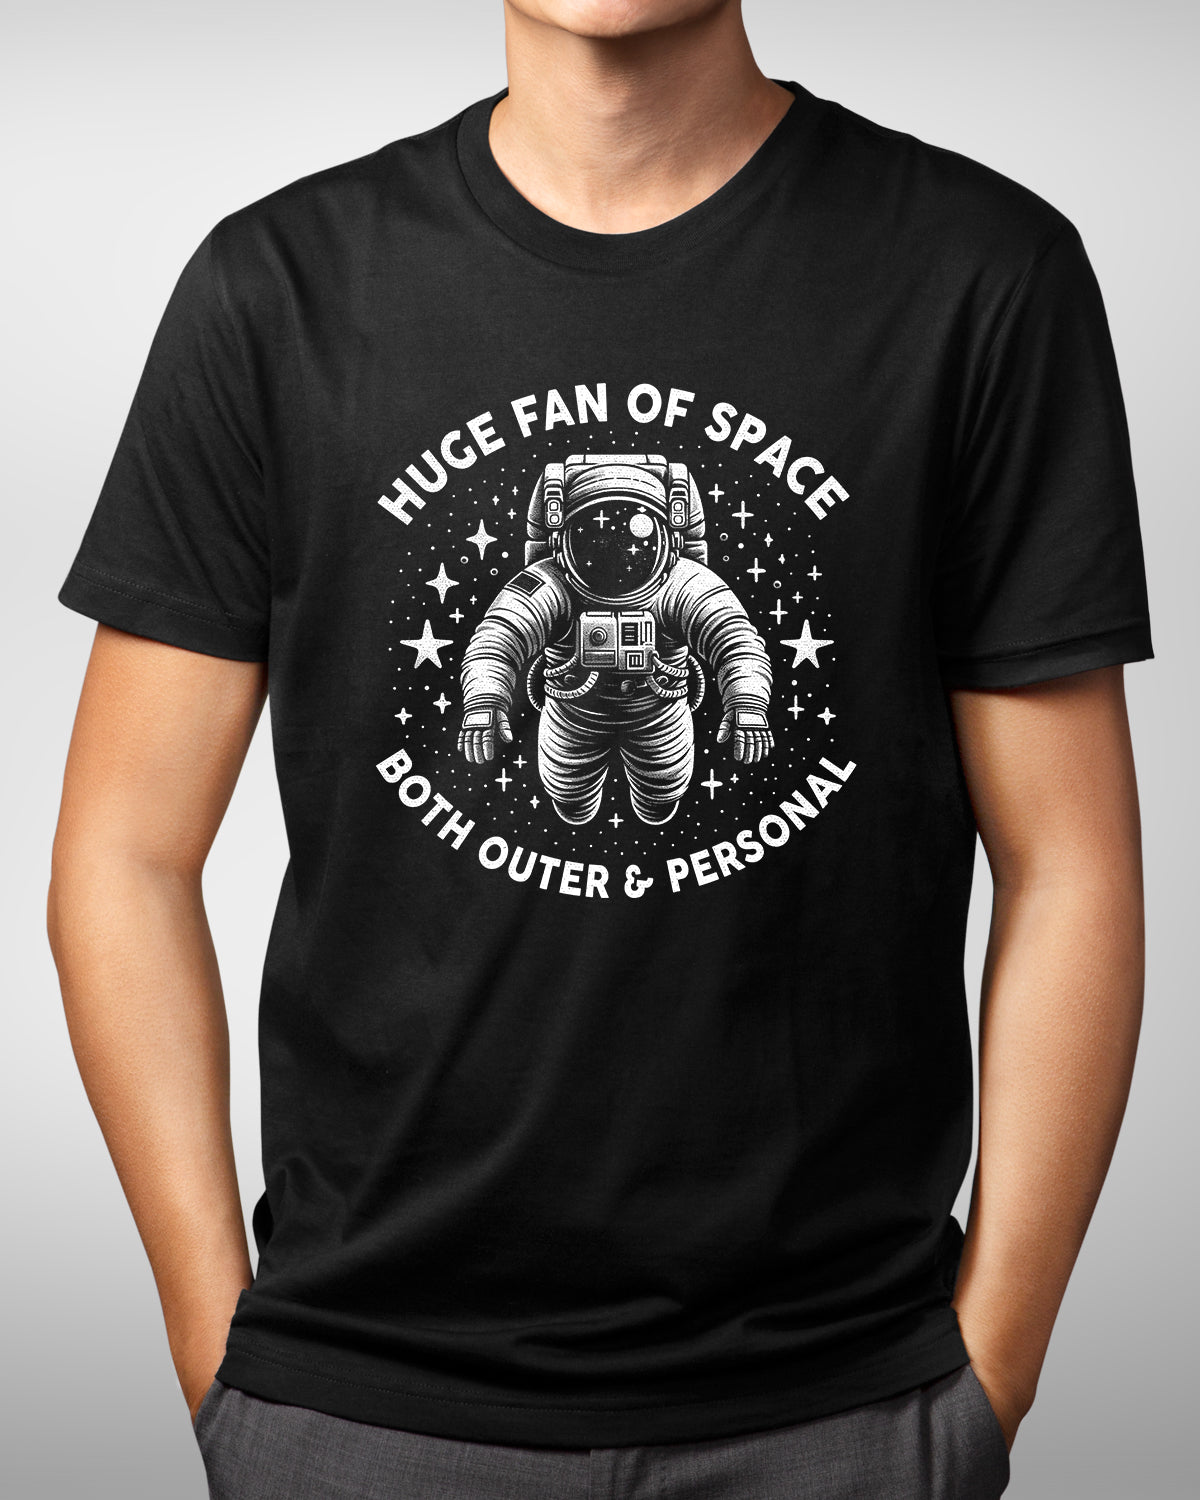 Funny Astronaut & Personal Space Fan Tee - Introvert Astronomy Gift Pun Shirt